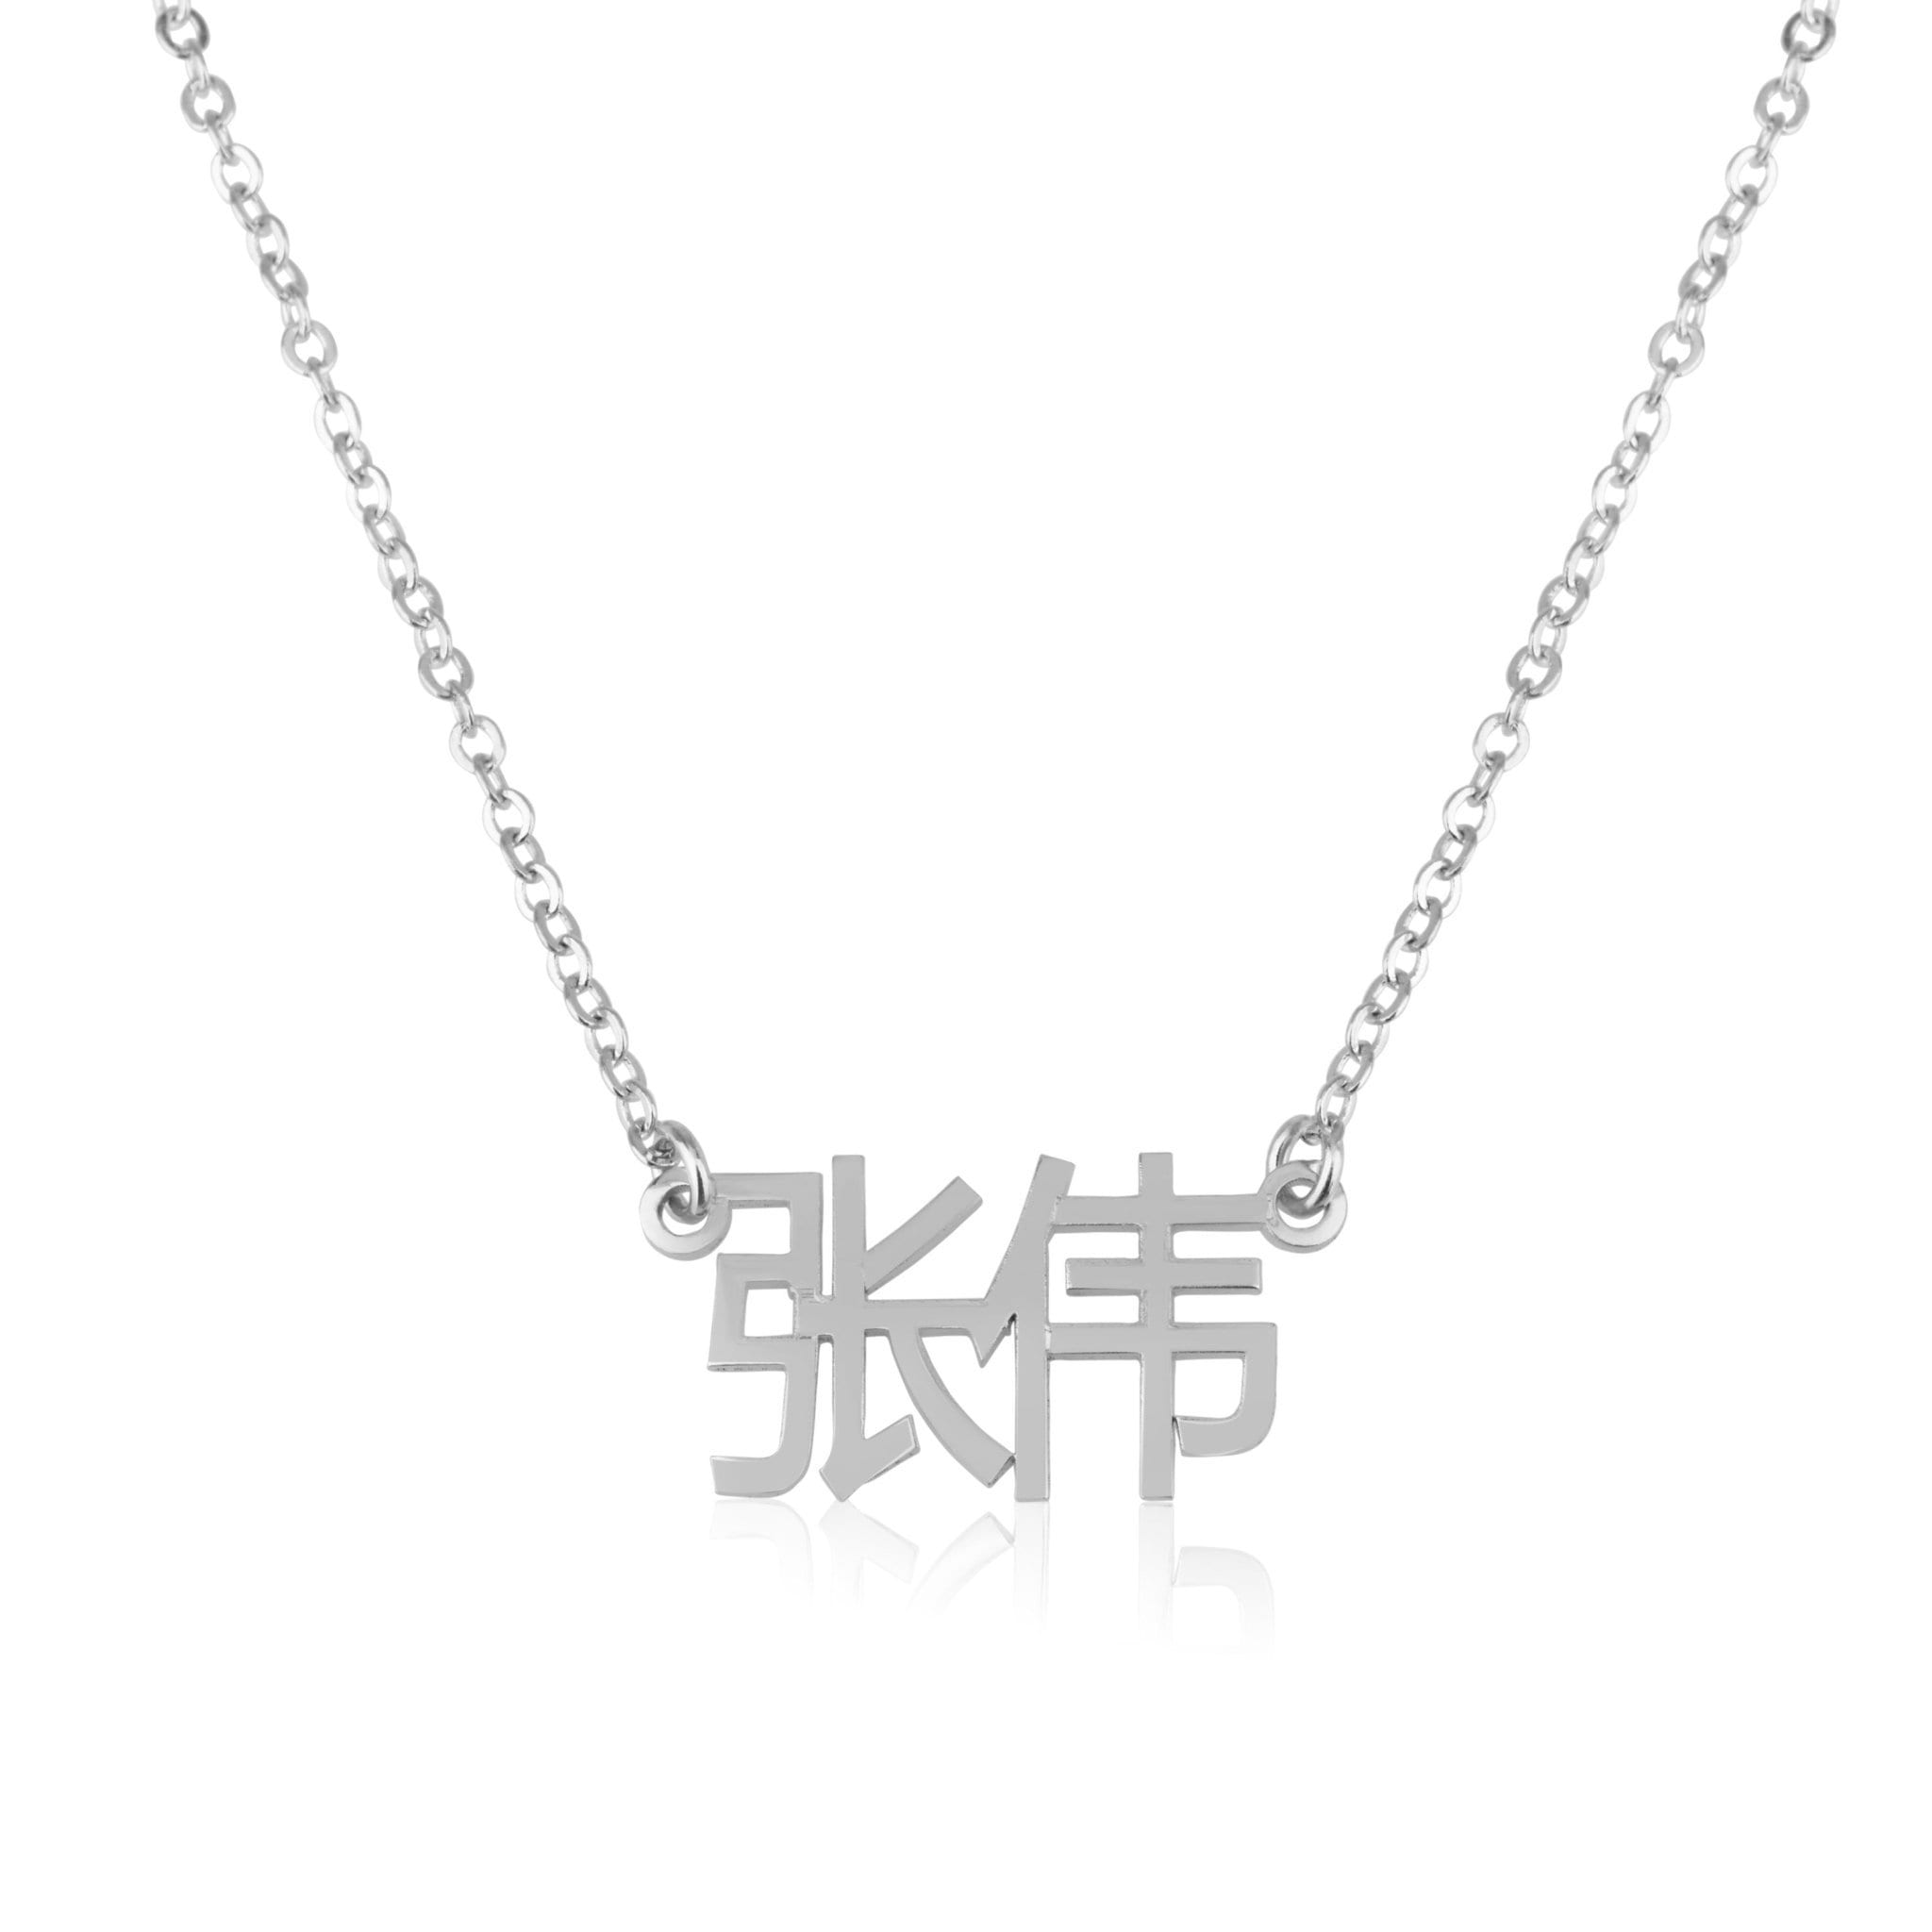 Chinese Nameplate Necklace - Beleco Jewelry